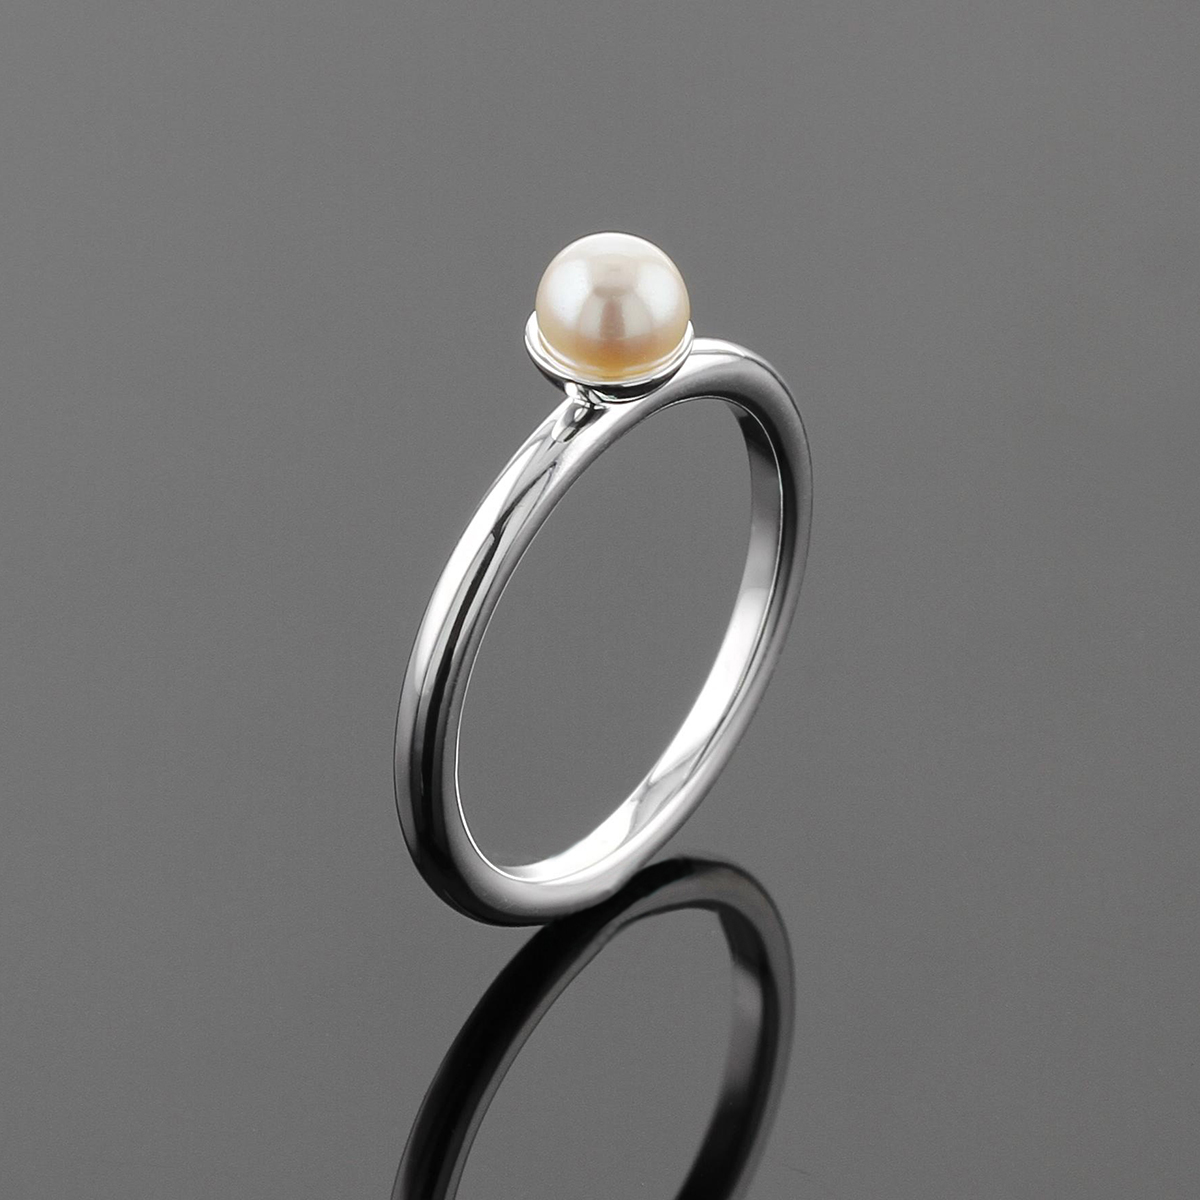 Sterling silver ring in a polished finish with a freshwater pearl